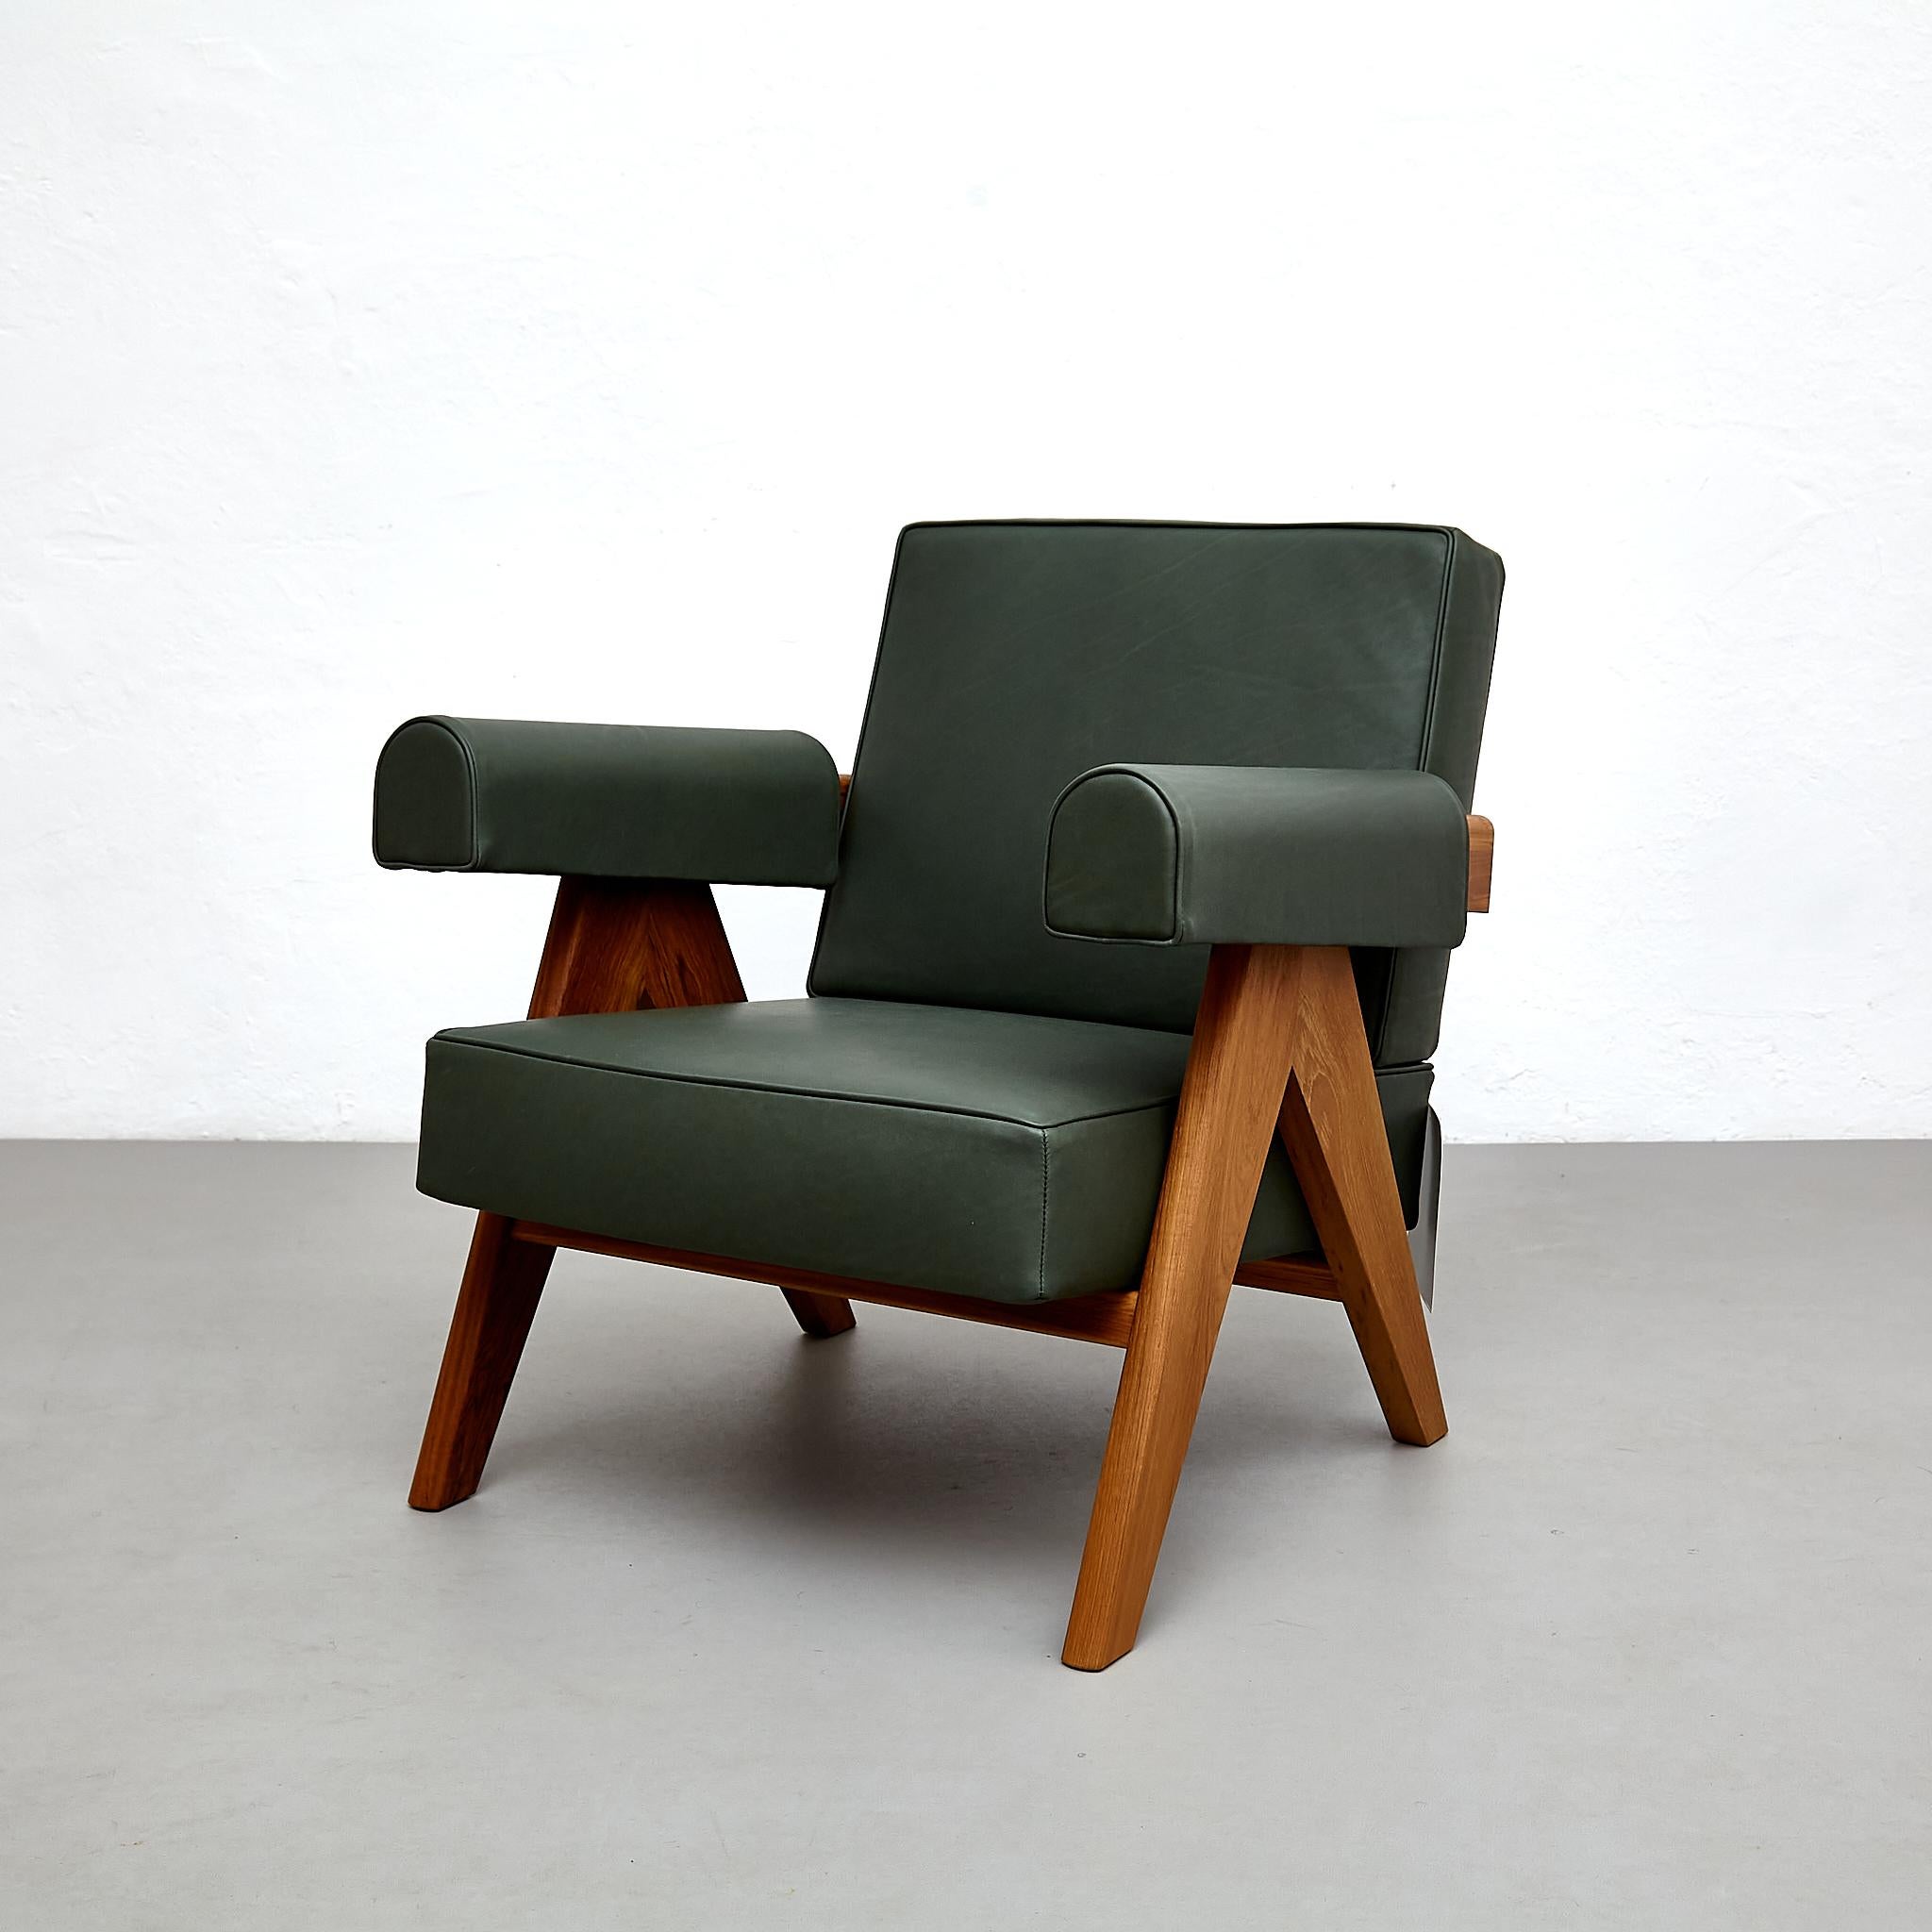 Set of Two Pierre Jeanneret Teak Wood Green Leather Armchair by Cassina For Sale 2